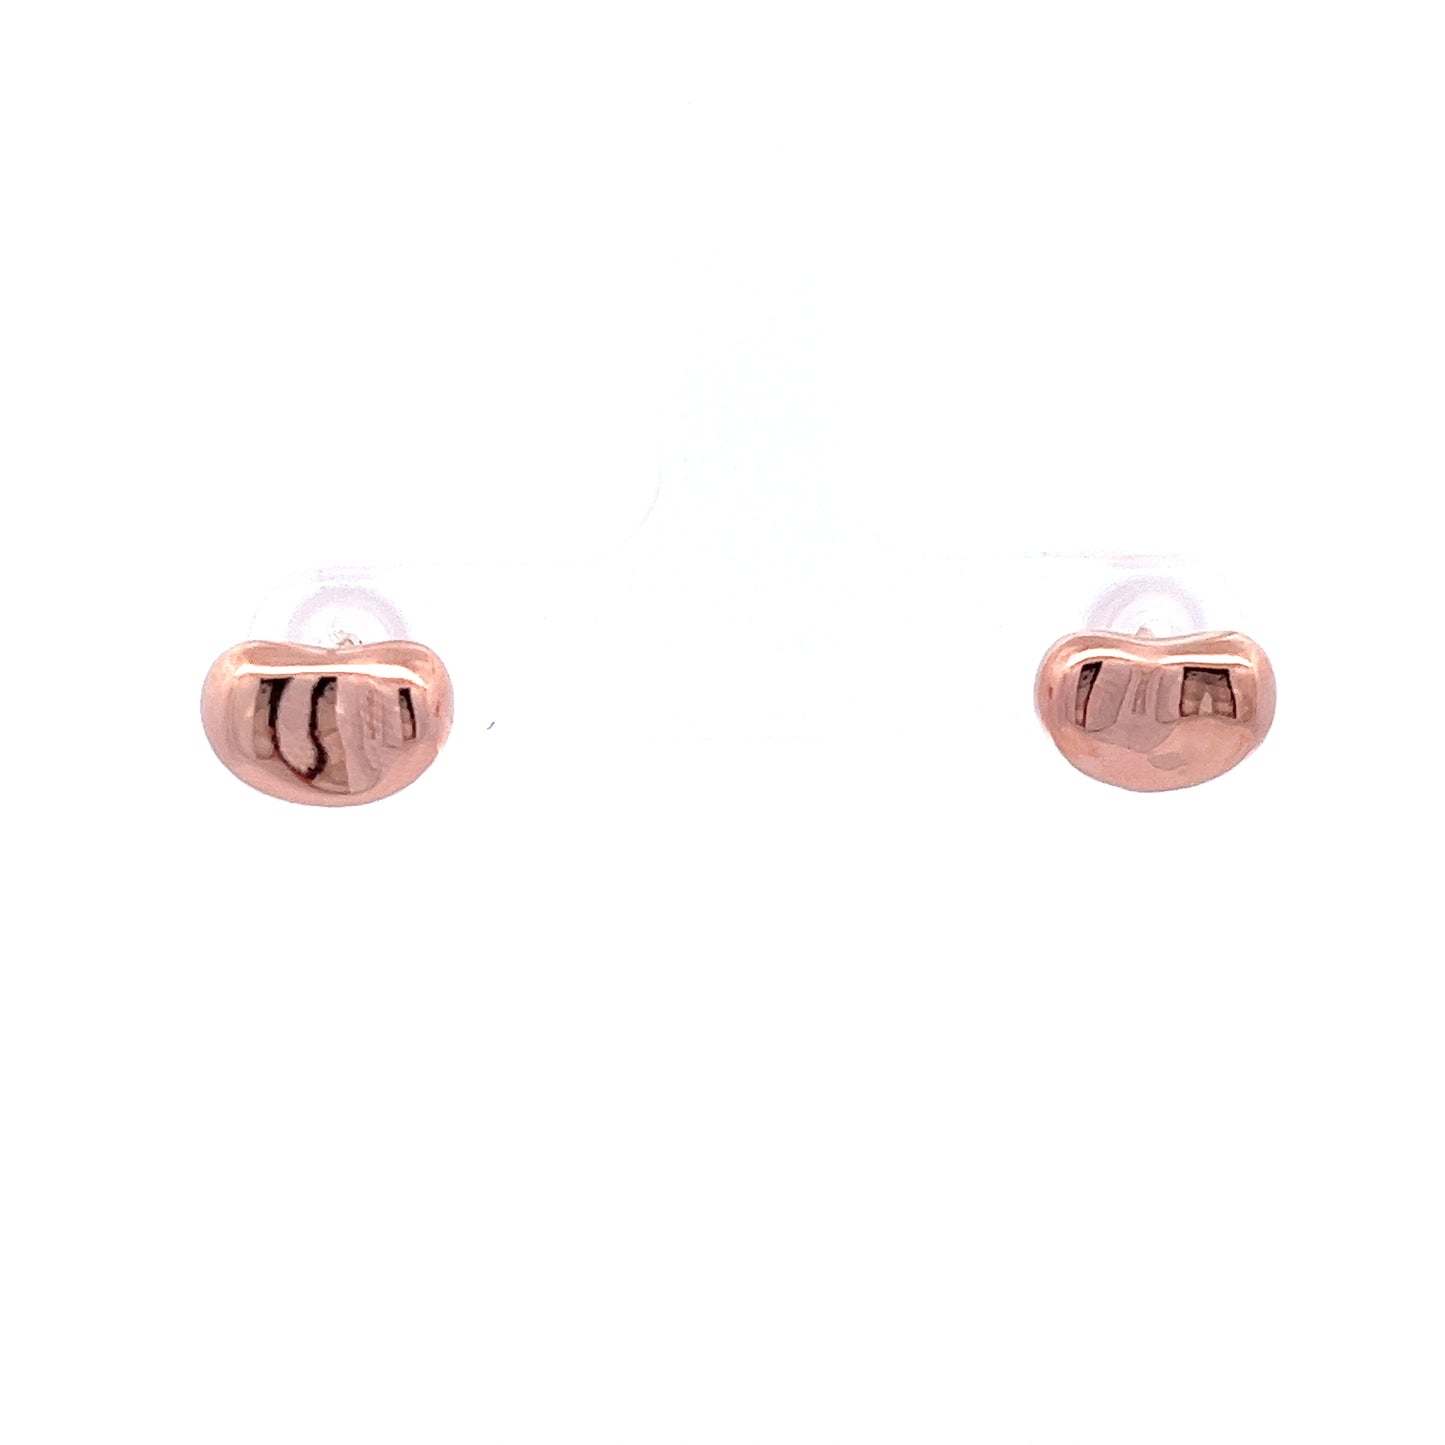 Peaberry Earrings in Rose Gold